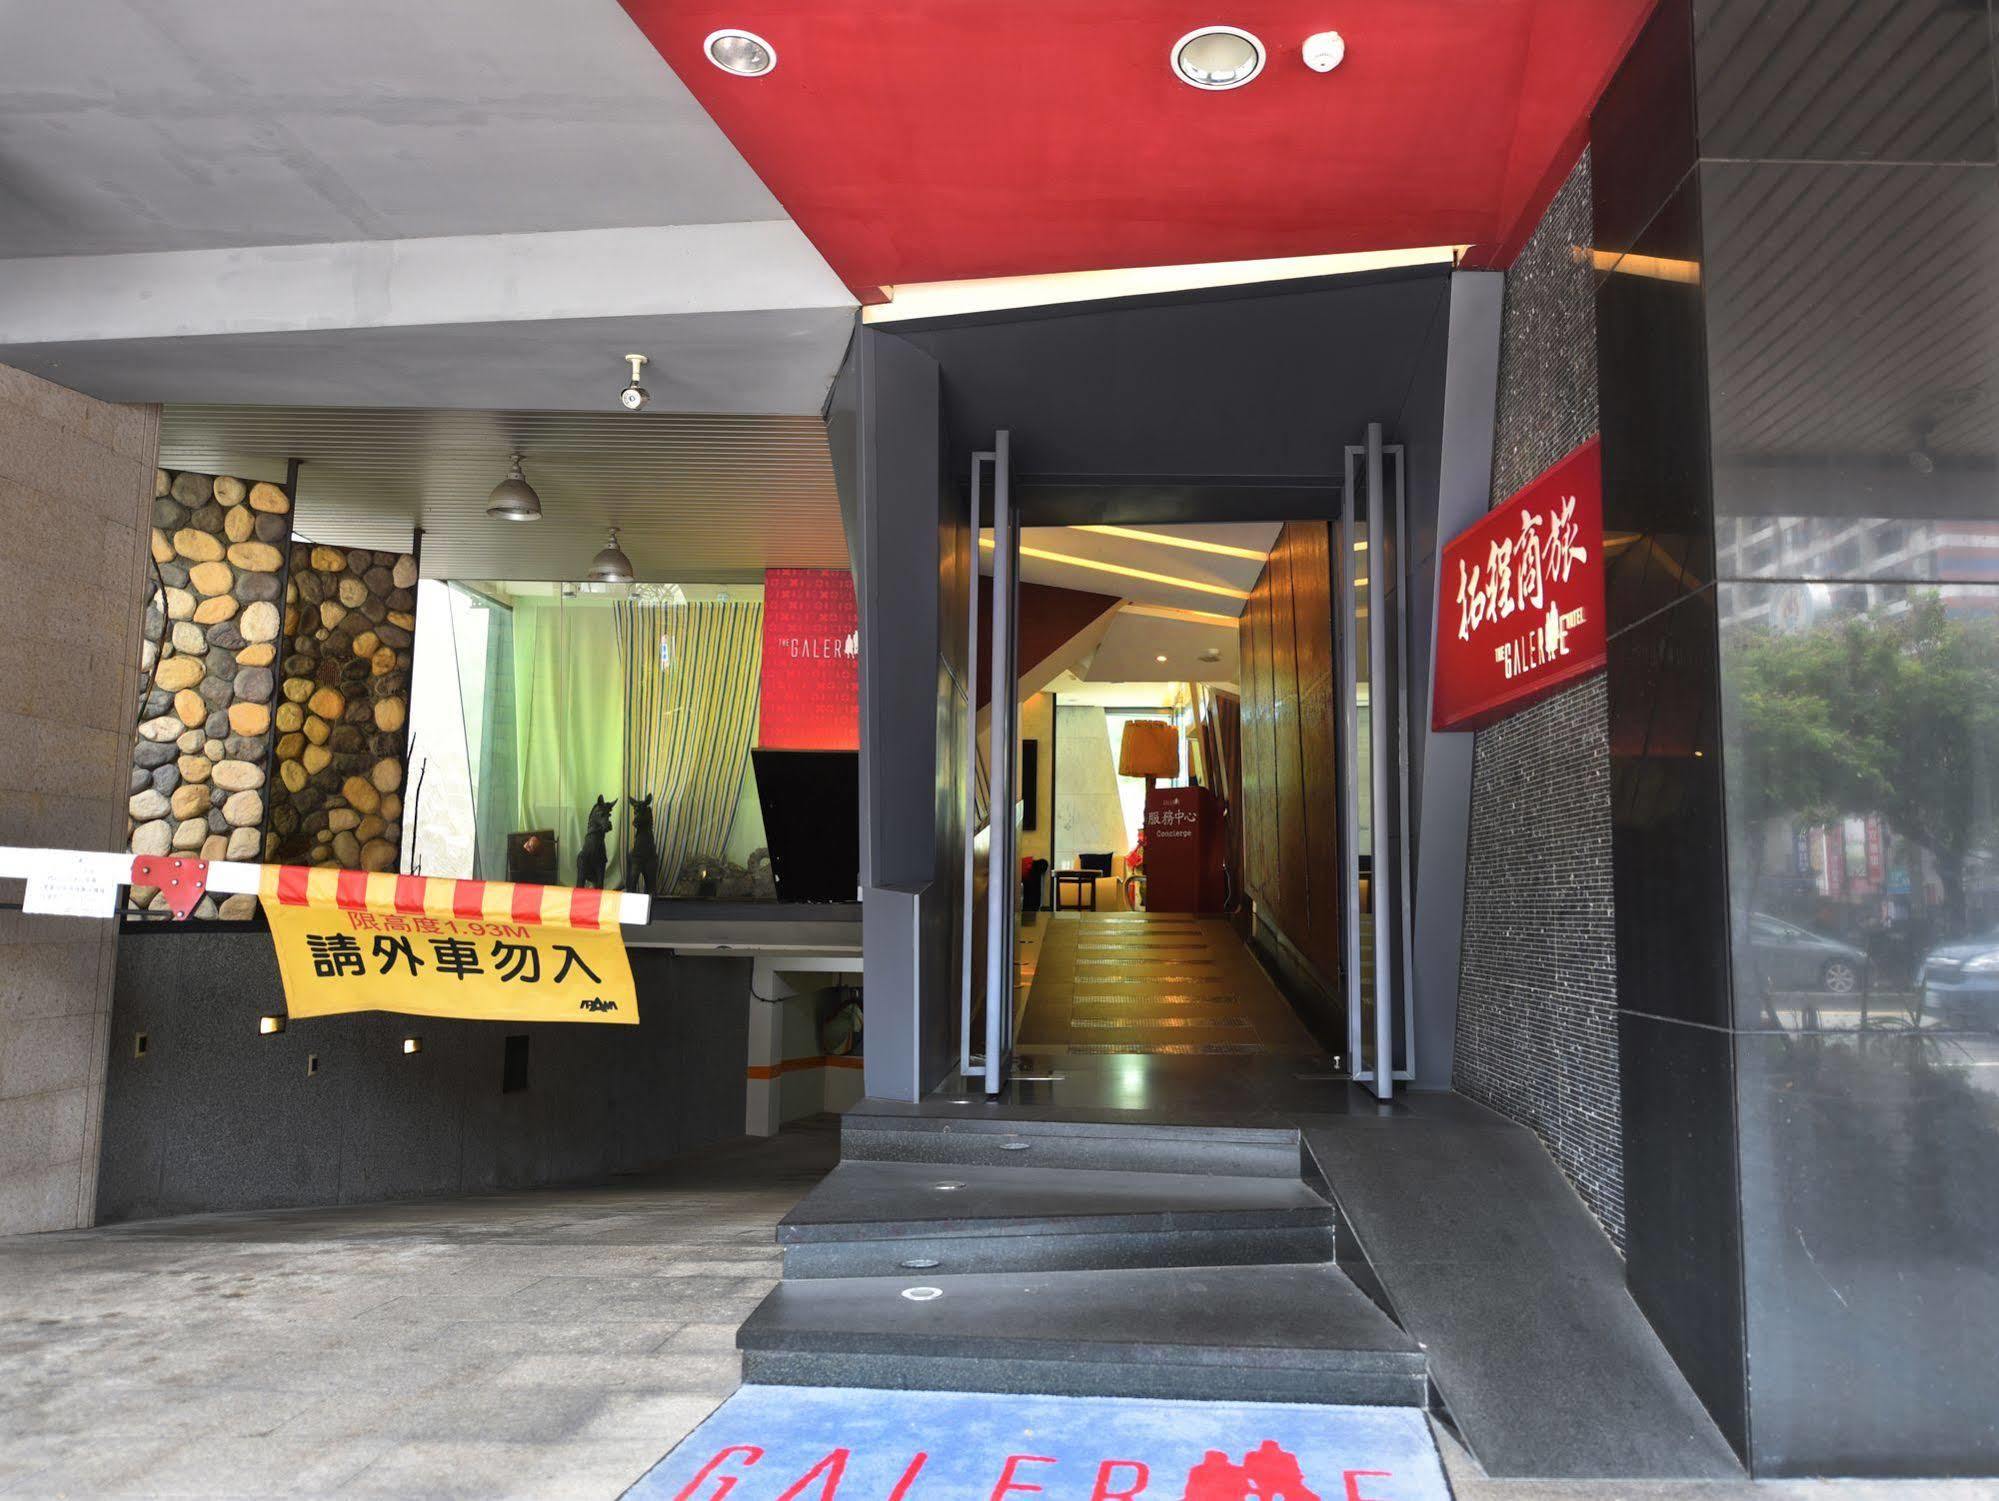 The Galerie Hotel Taichung Exterior foto